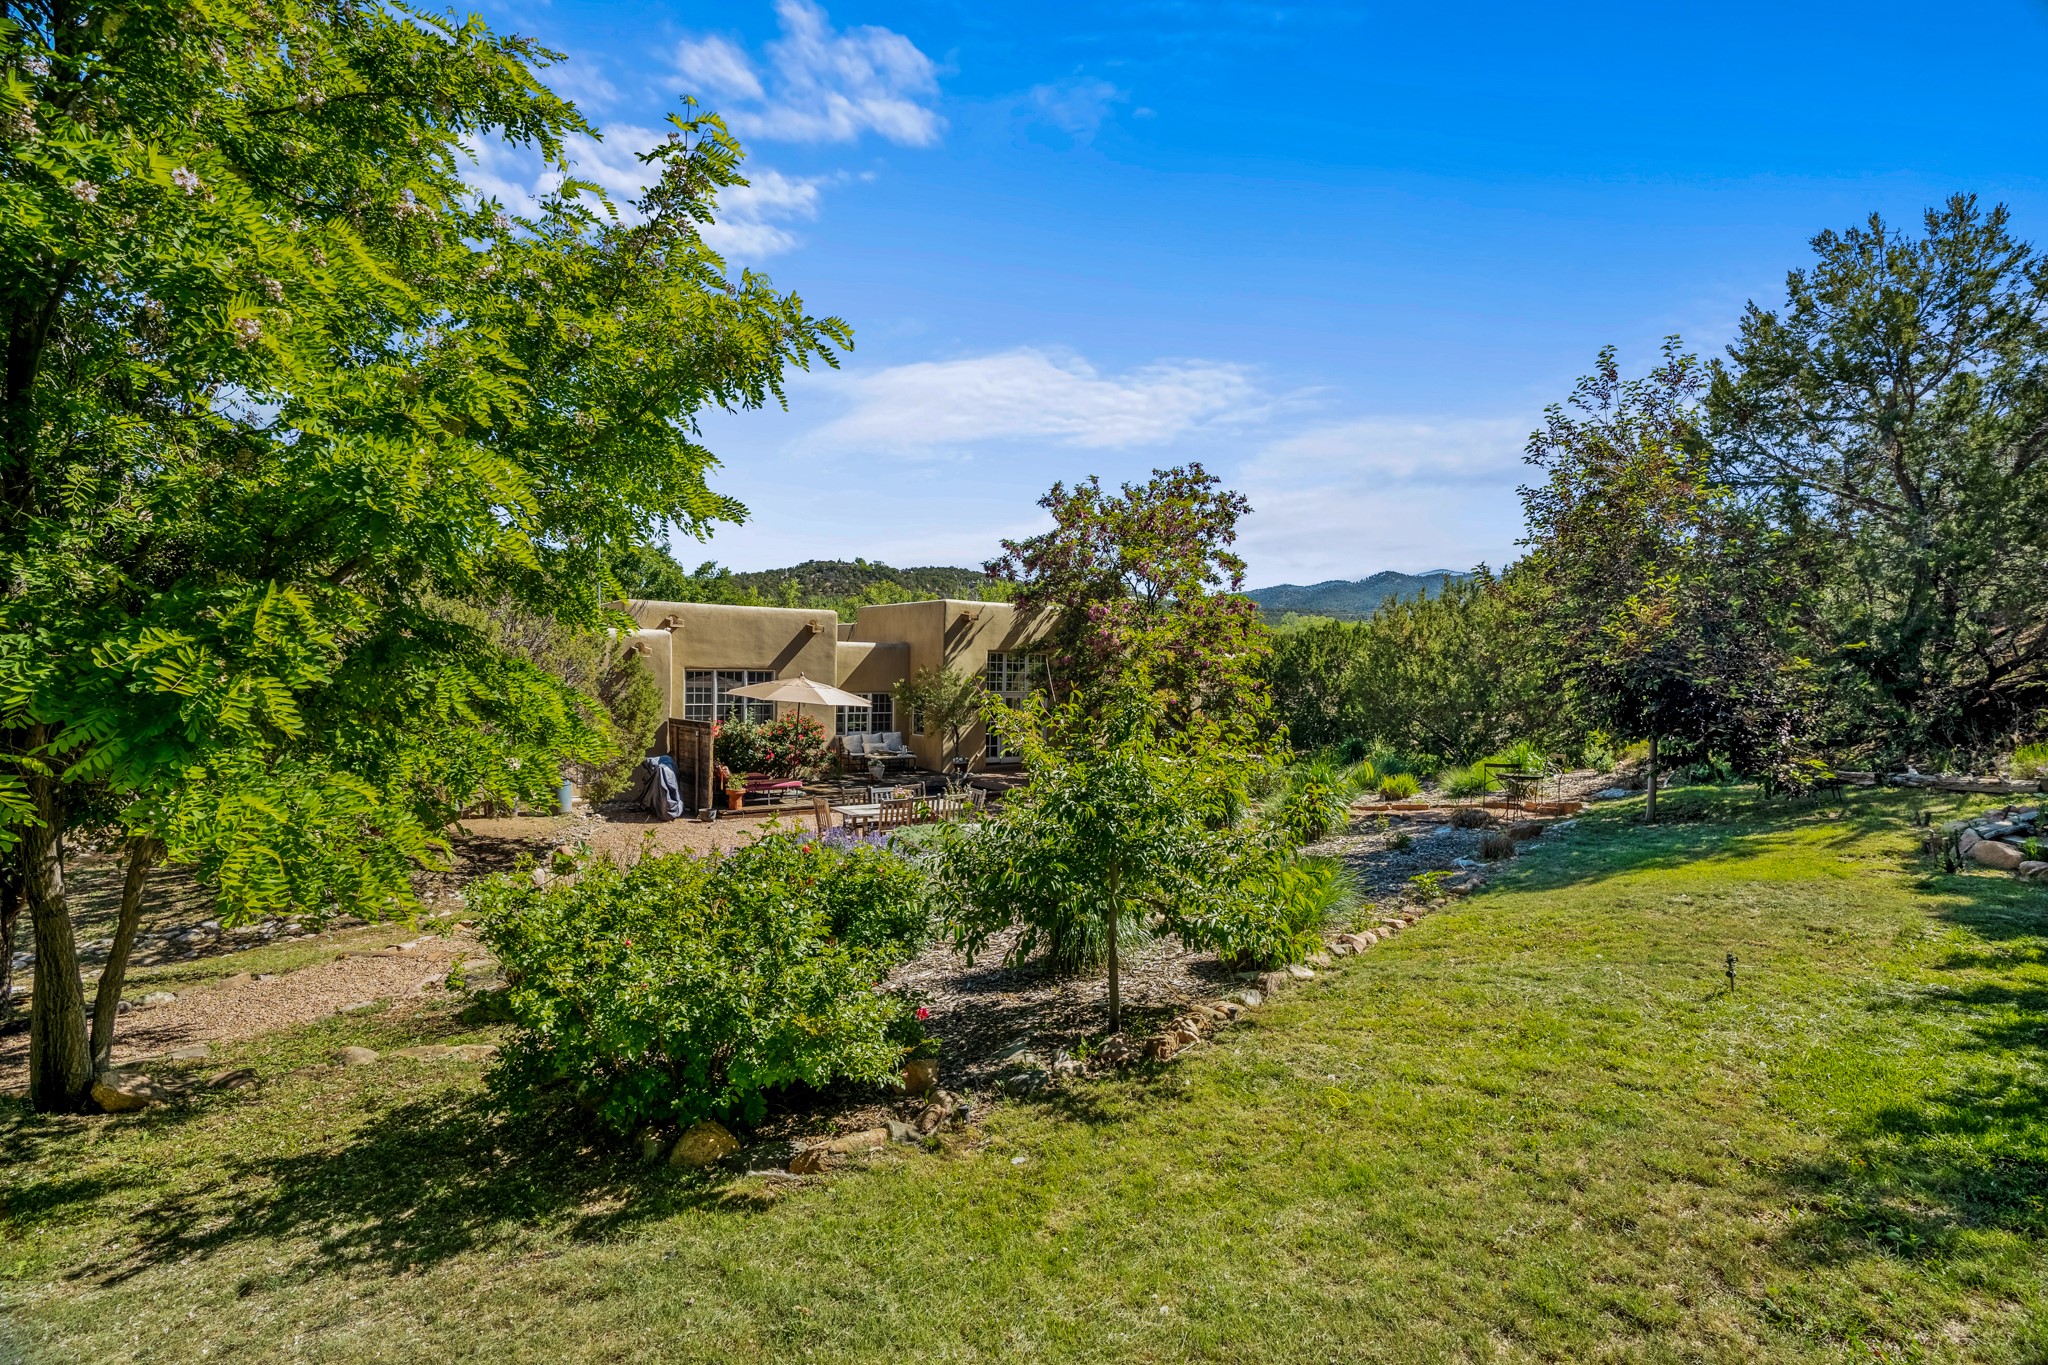 1470 Canyon Road, Santa Fe, New Mexico 87501, 4 Bedrooms Bedrooms, ,3 BathroomsBathrooms,Residential,For Sale,1470 Canyon Road,202338774